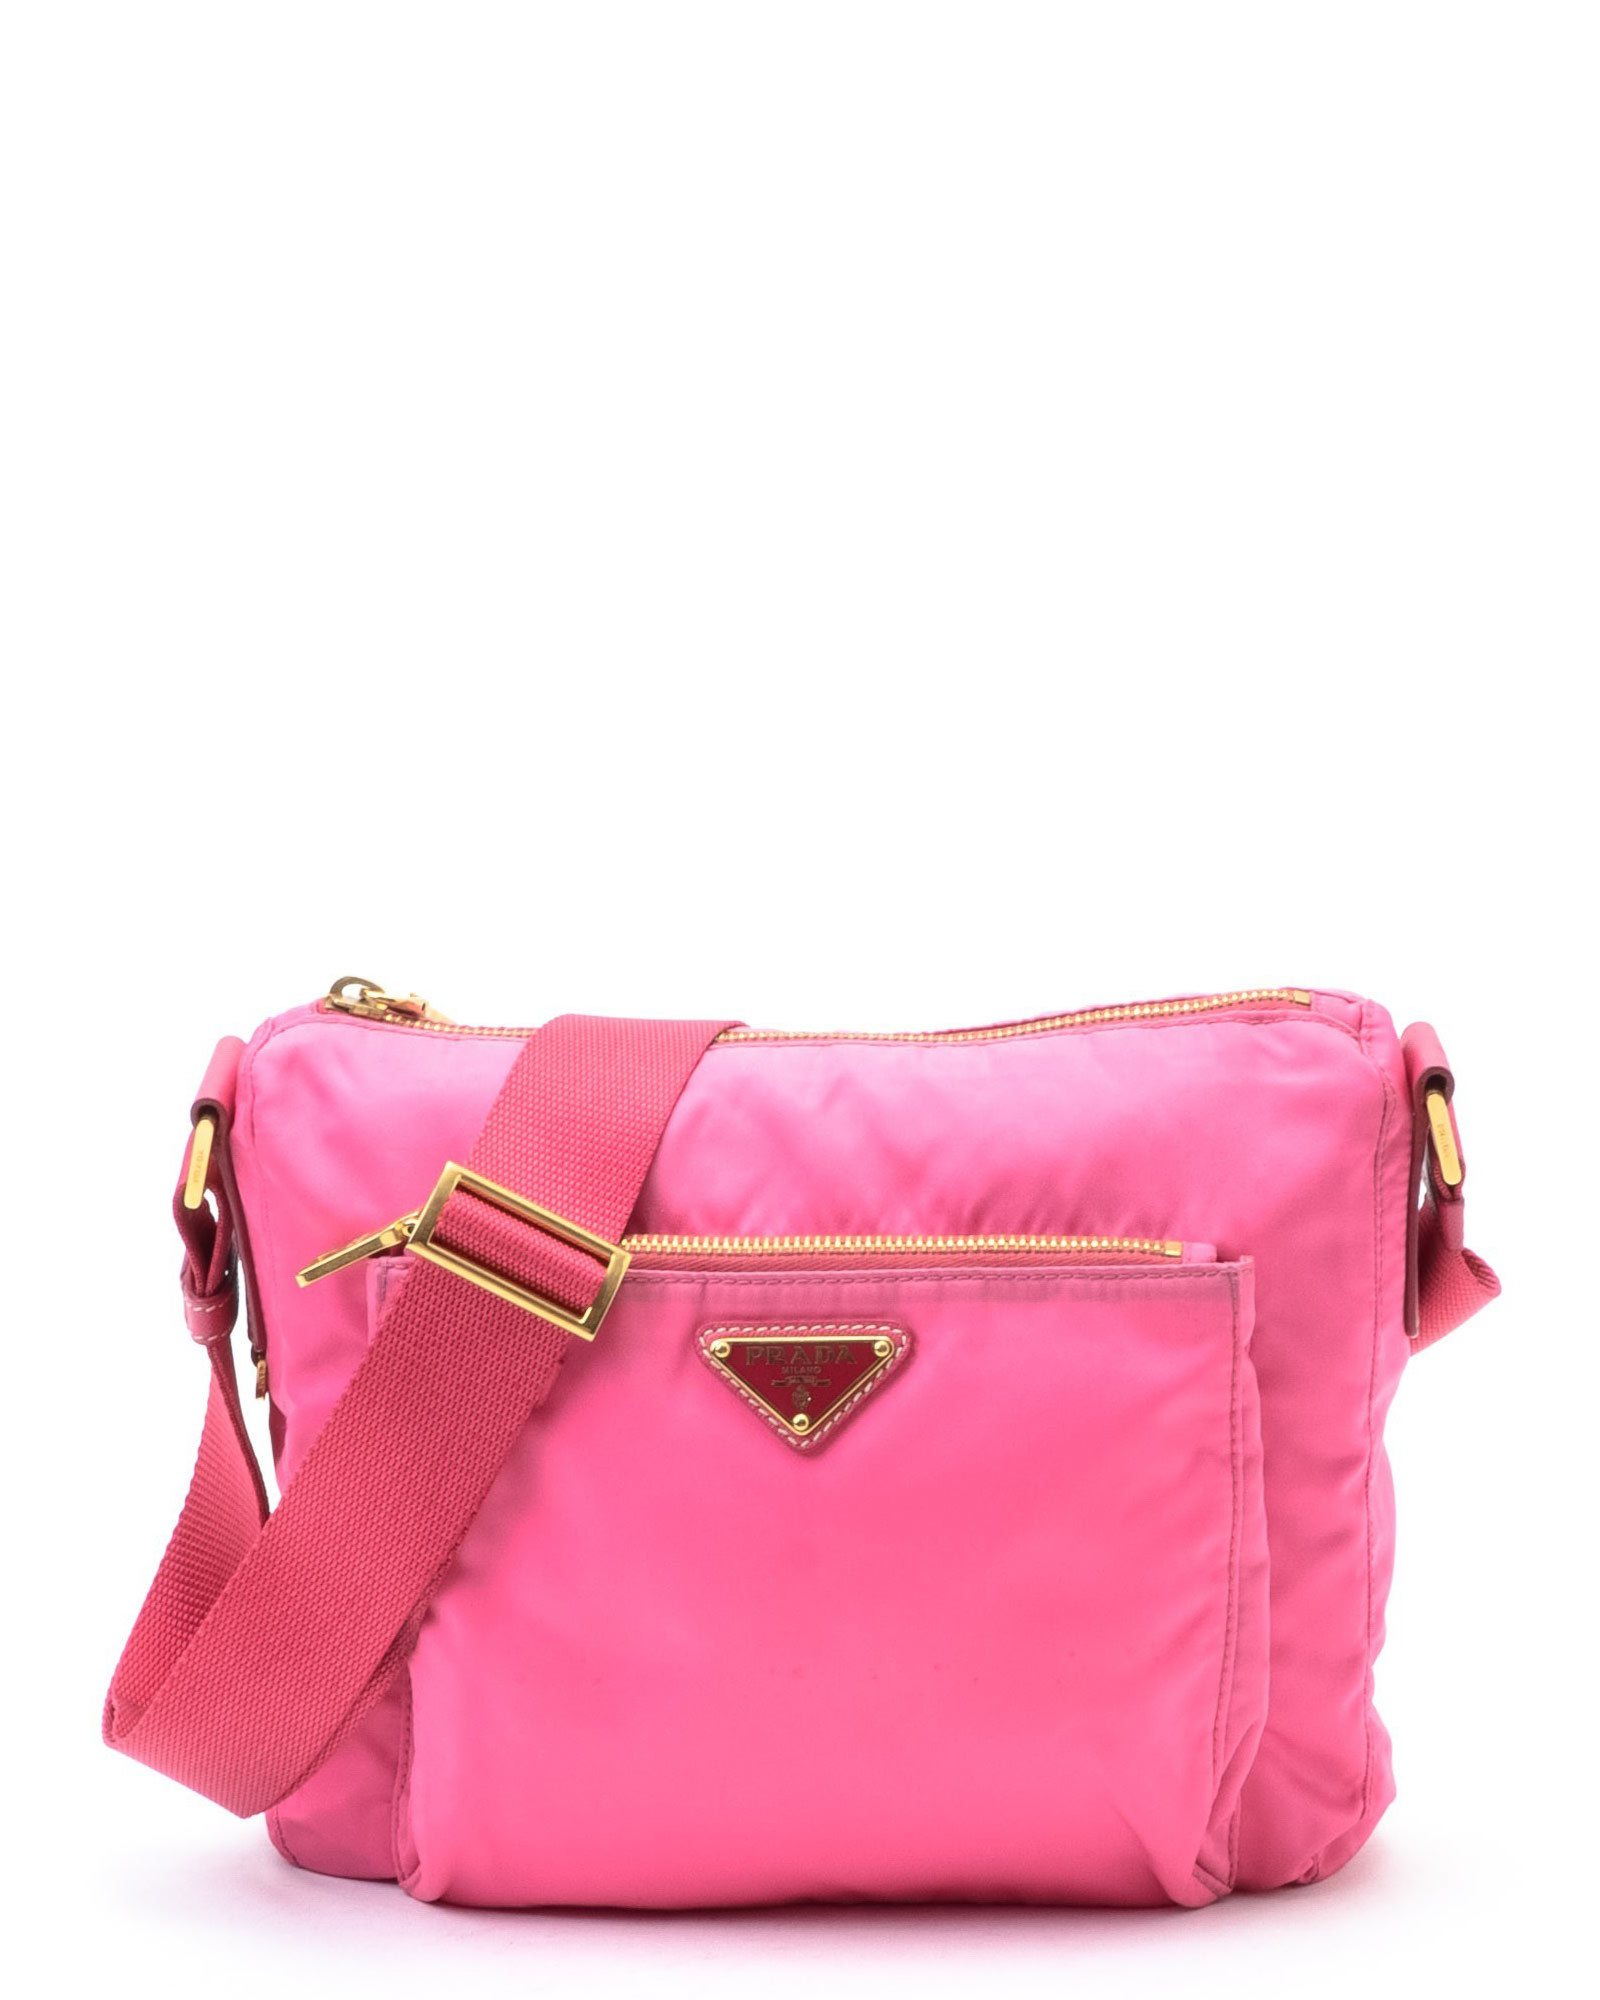 Prada Synthetic Guaranteed Authentic Pre-owned Vela Cross-body Bag in Pink - Lyst